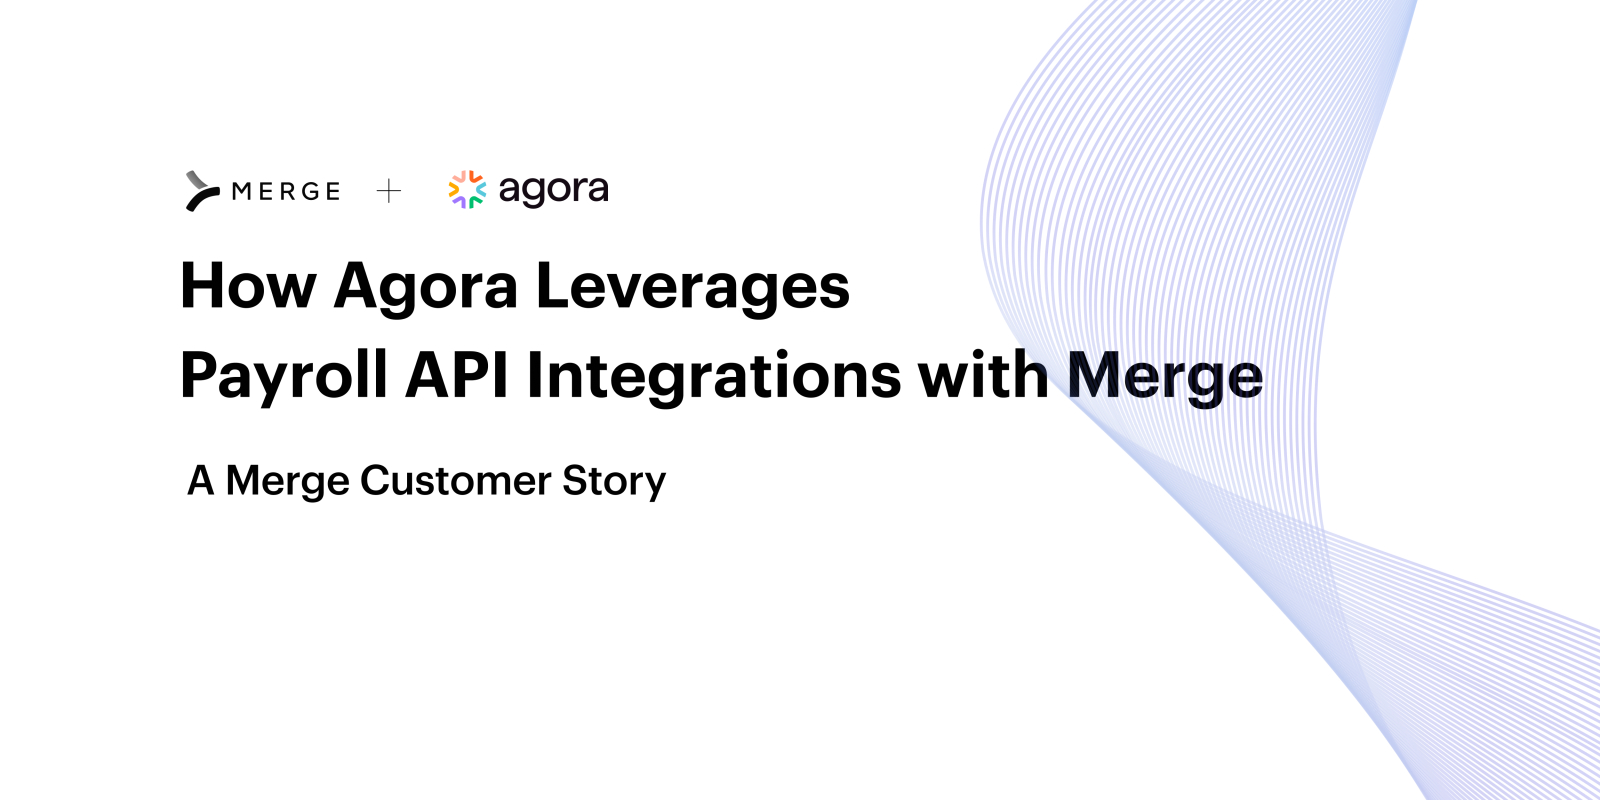 How Agora Leverages Payroll API Integrations with Merge